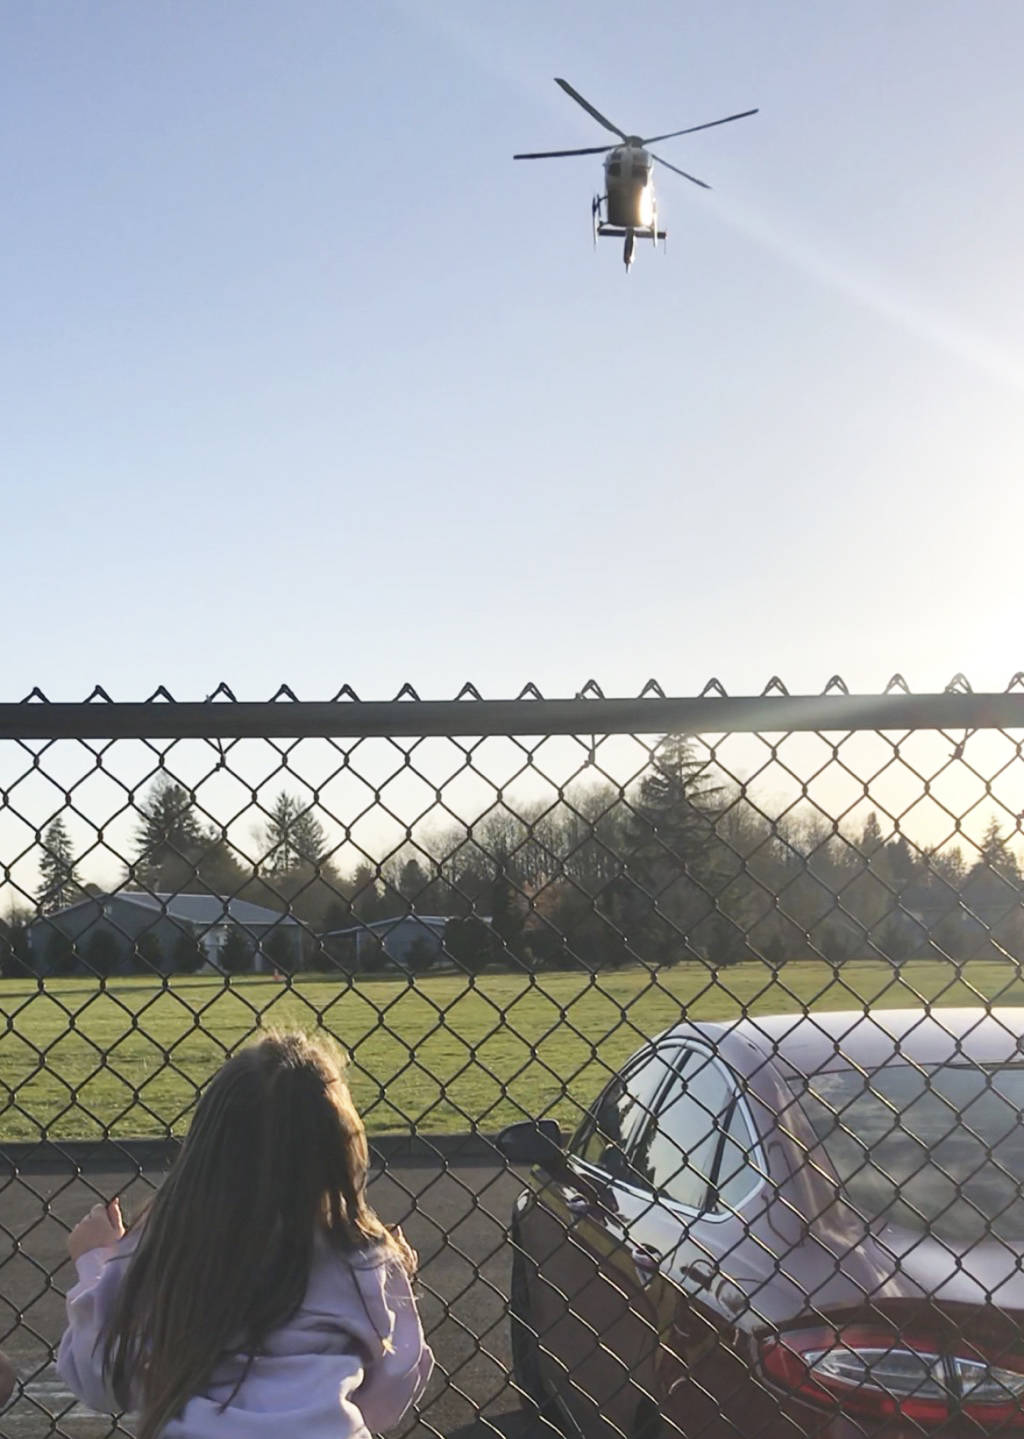 (Photo by Savannah Moorcroft) Paisley Moorcroft climbs a fence as an Airlift Northwest helicopter lifts off shortly before her Montesano Little League practice.